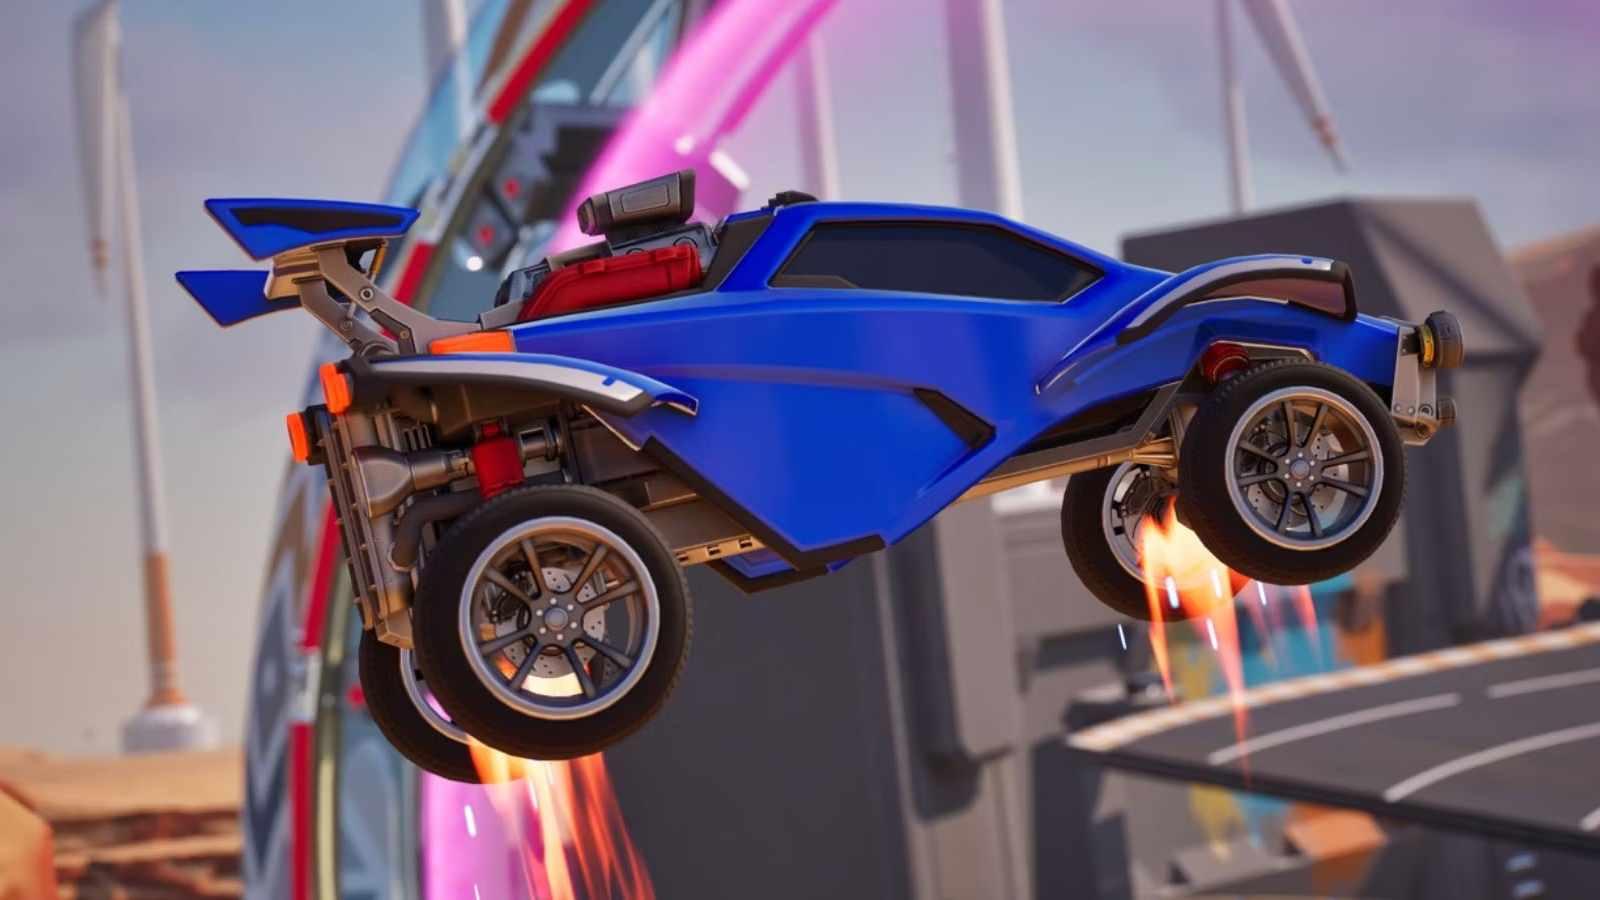 Rocket Racing comes to Fortnite: this is the new Rocket League